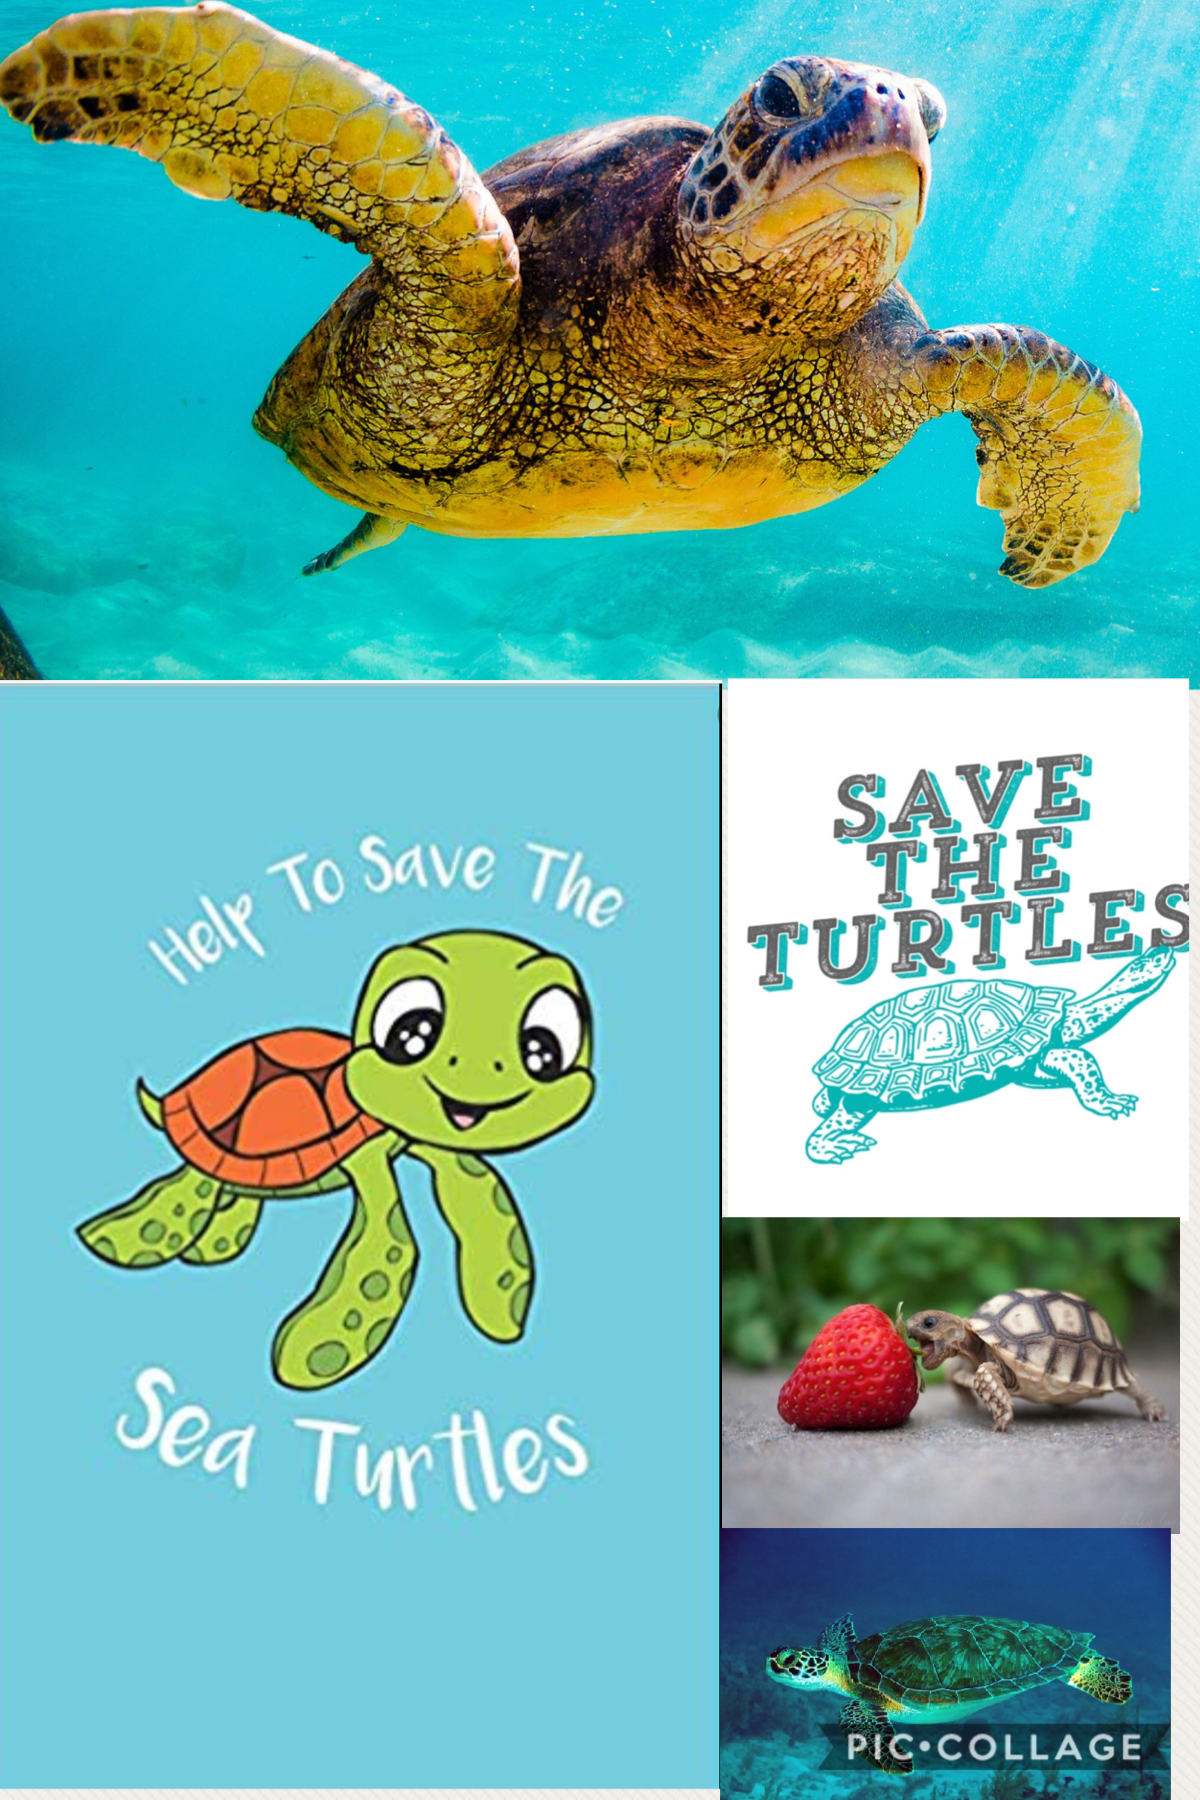 #save the turtles* and I oop*🌻